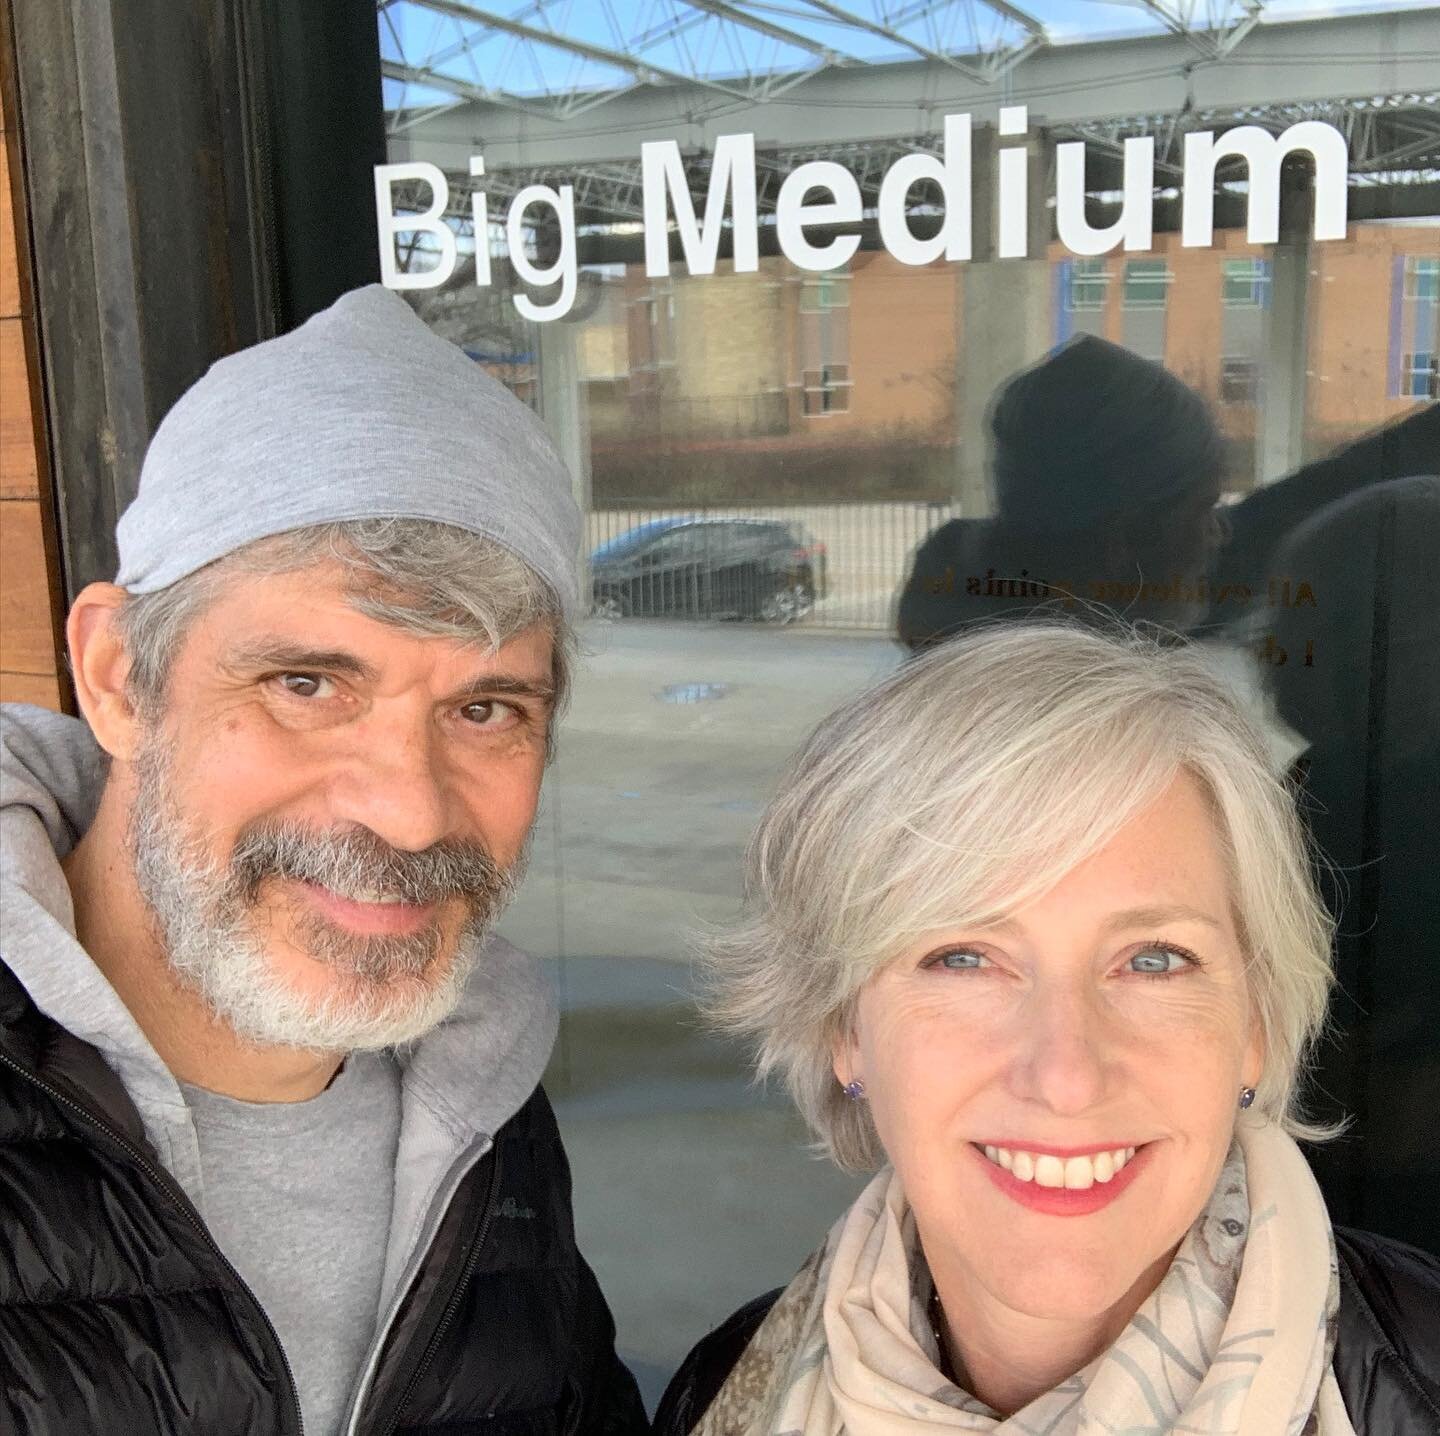 We are so excited to be having an exhibition at Big Medium @bigmediumaustin in Austin, Texas!!!
.
The exhibition features the work from the 147 Devices for Integrated Principles series. With sculpture, video, and photographs the exhibition looks amaz